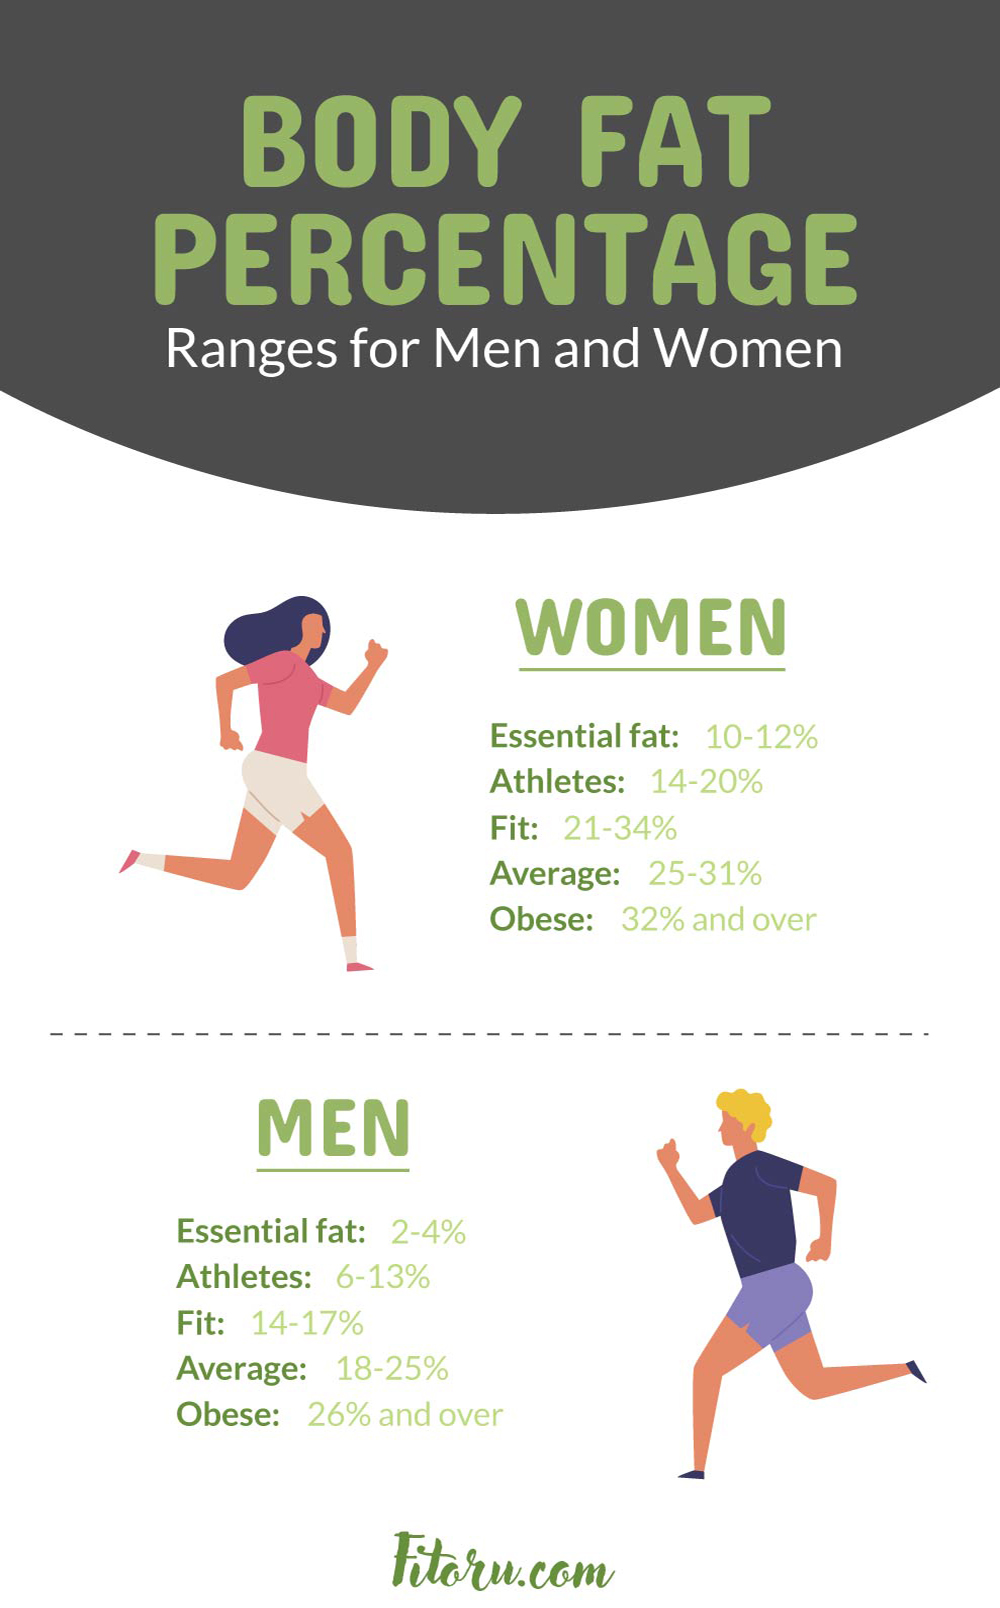 Body fat percentage differs between the two genders. Find out which percentage you fall under.